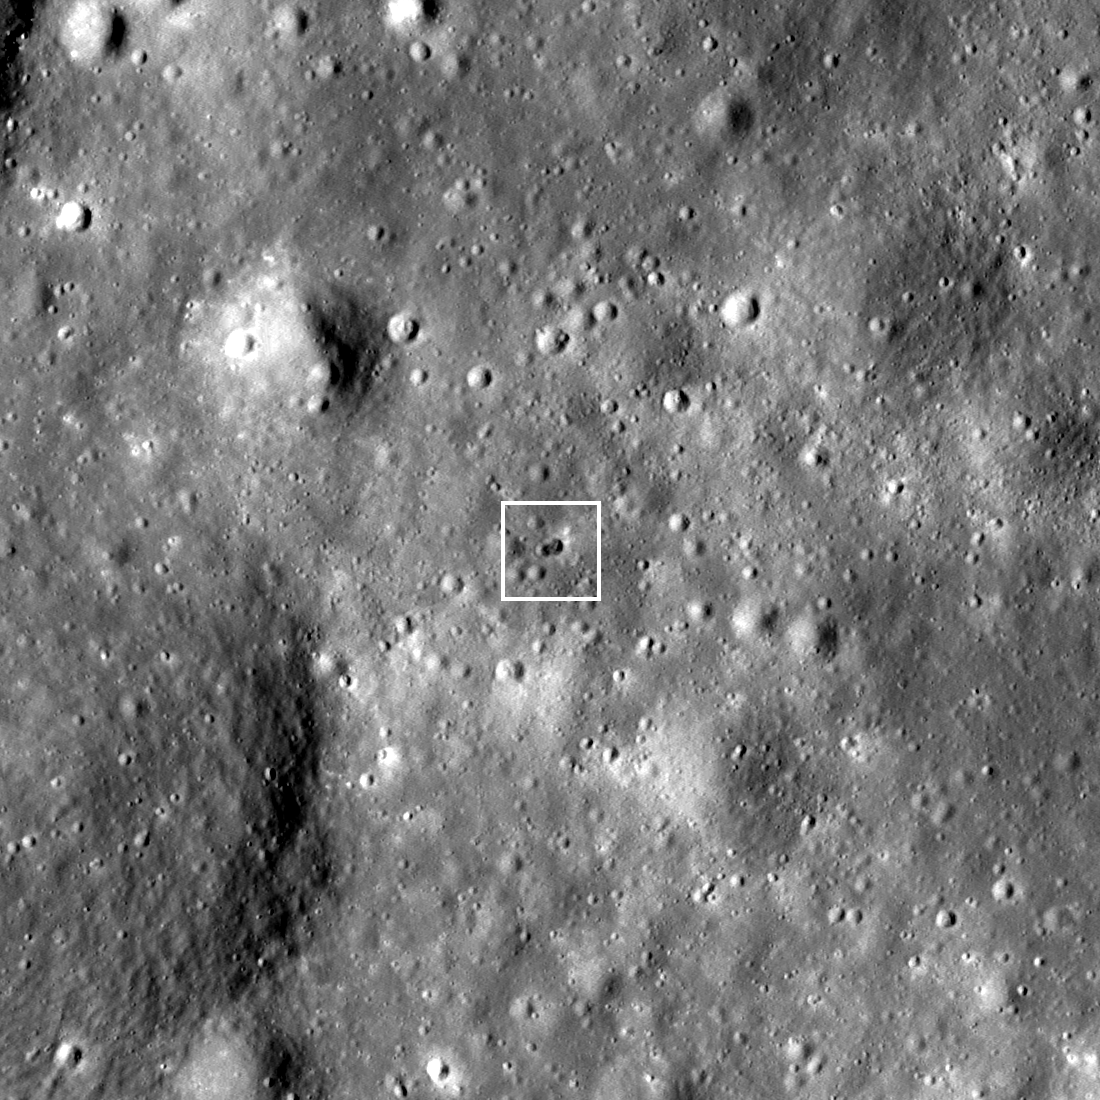 a double-crater on the moon from a rocket impact